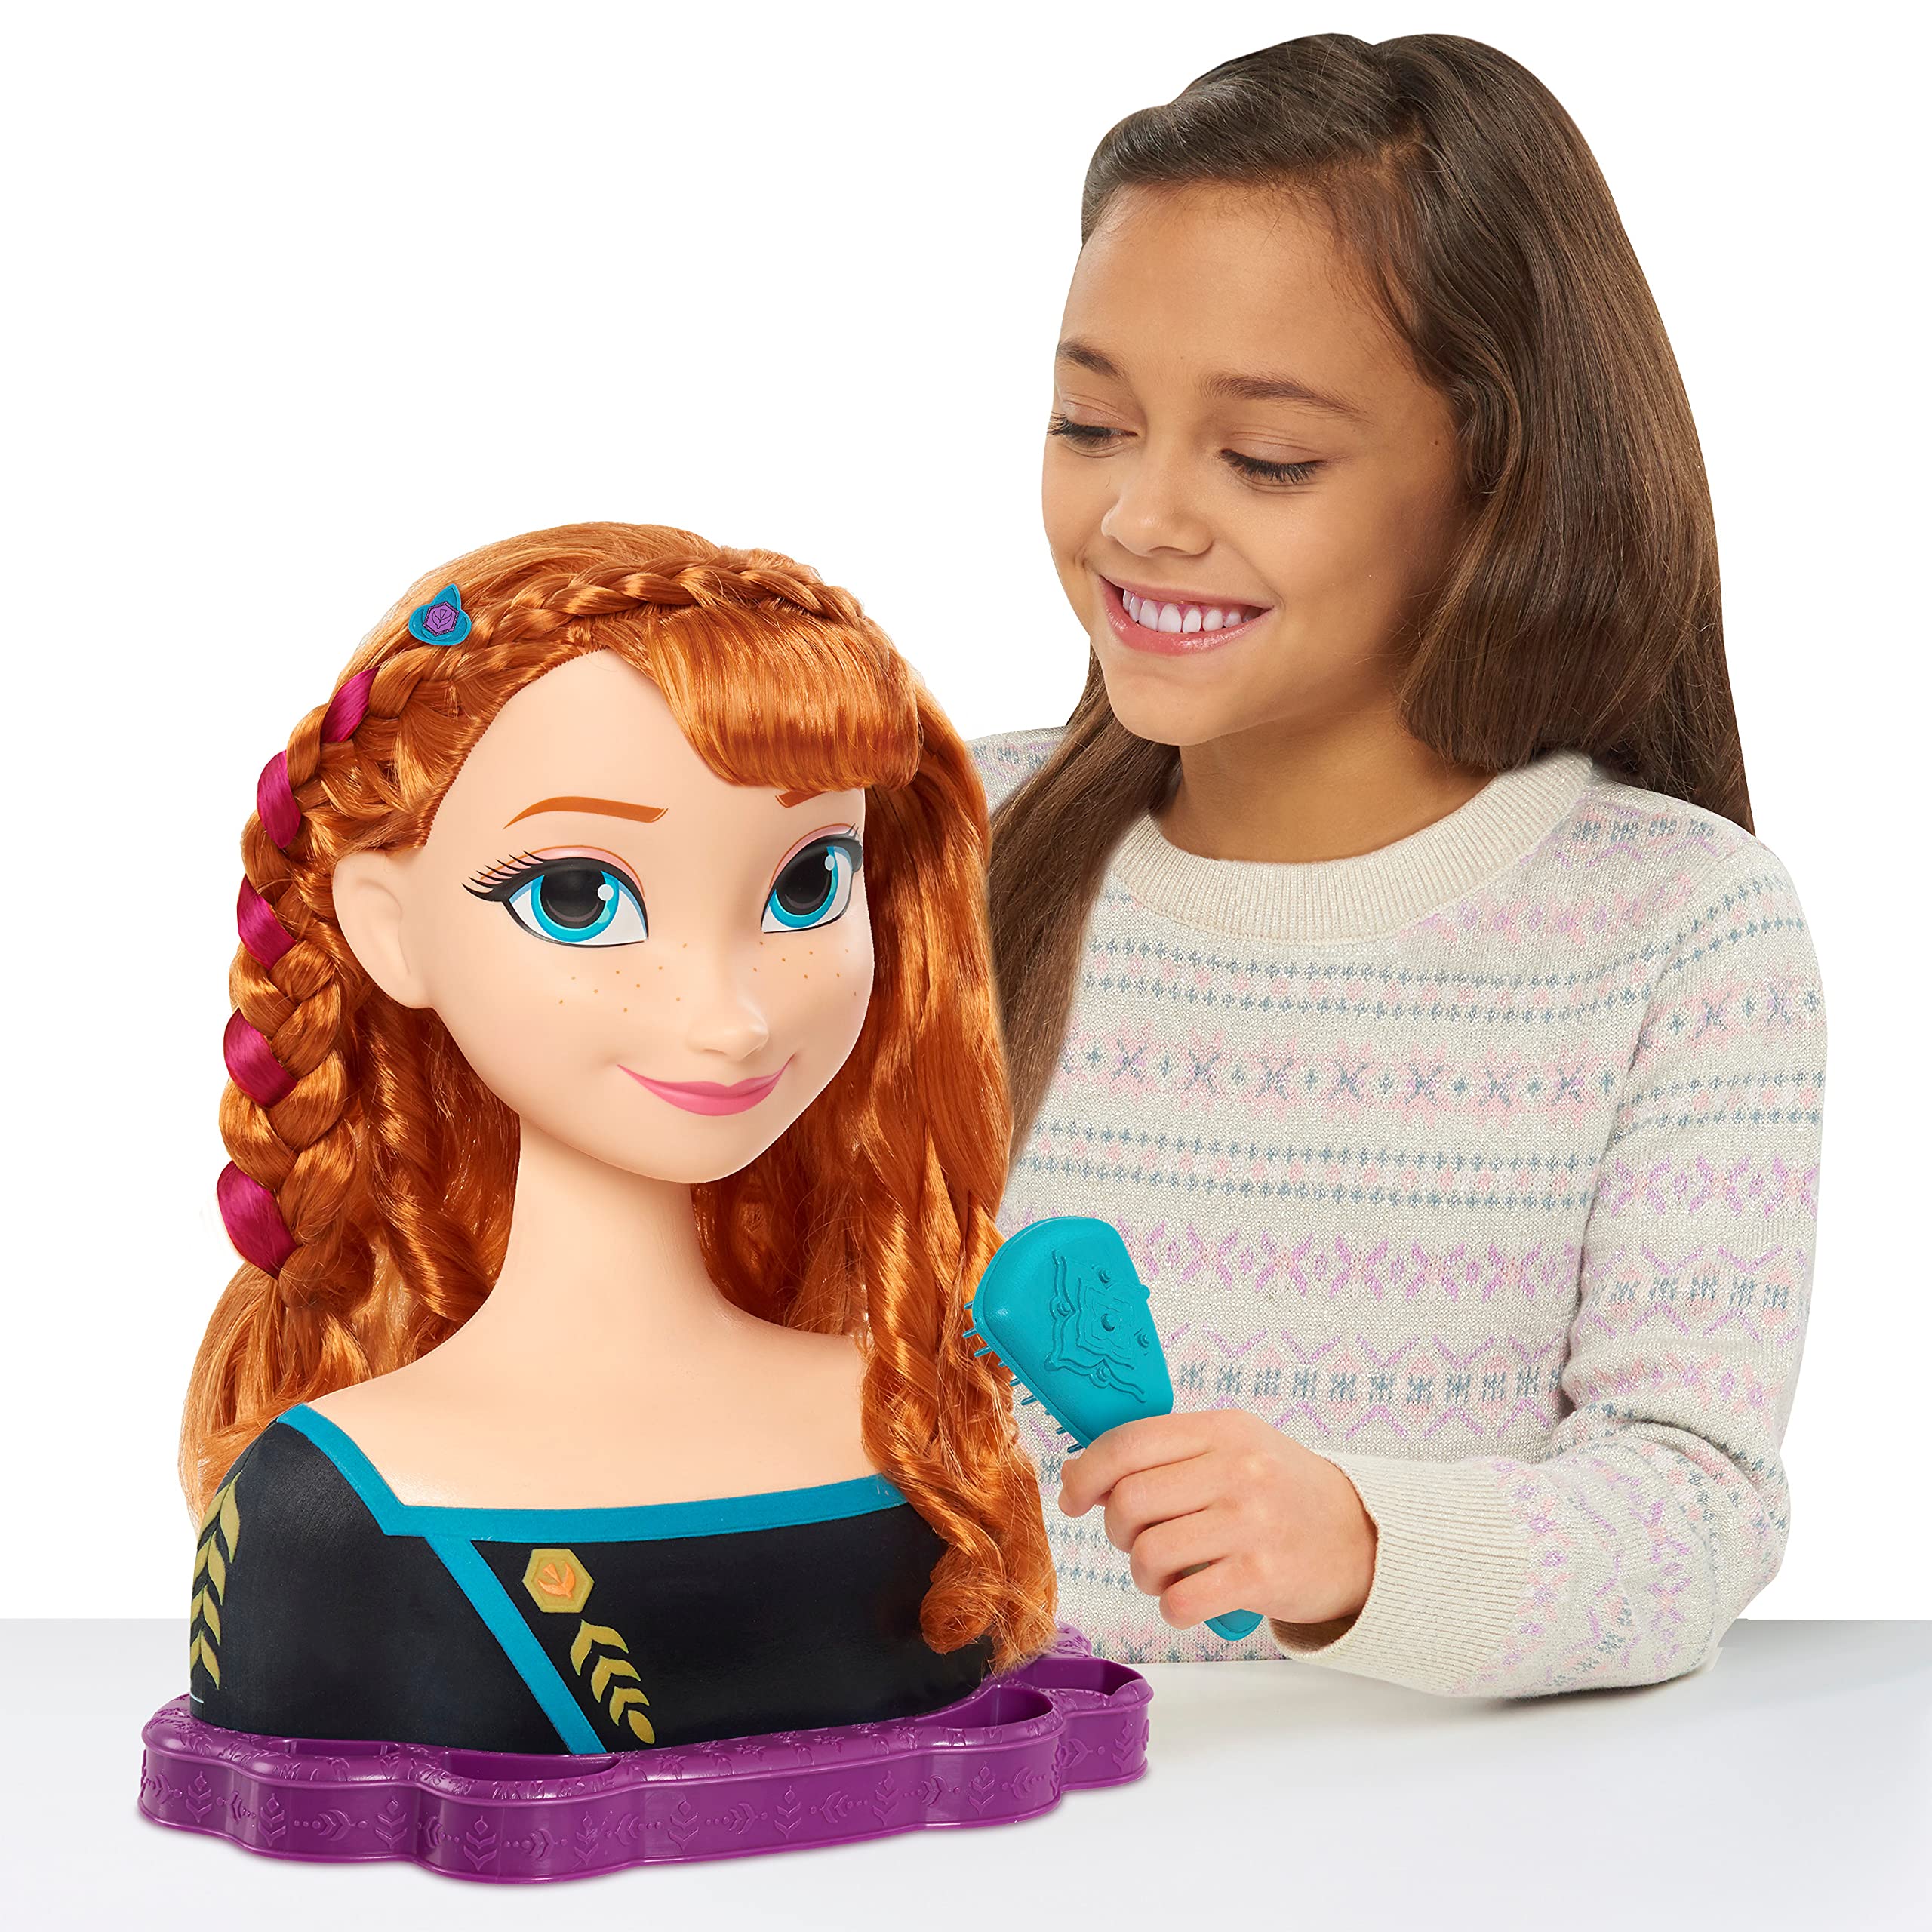 Disney’s Frozen 2 Queen Anna Deluxe Styling Head, 18-pieces, by Just Play, Multi-color